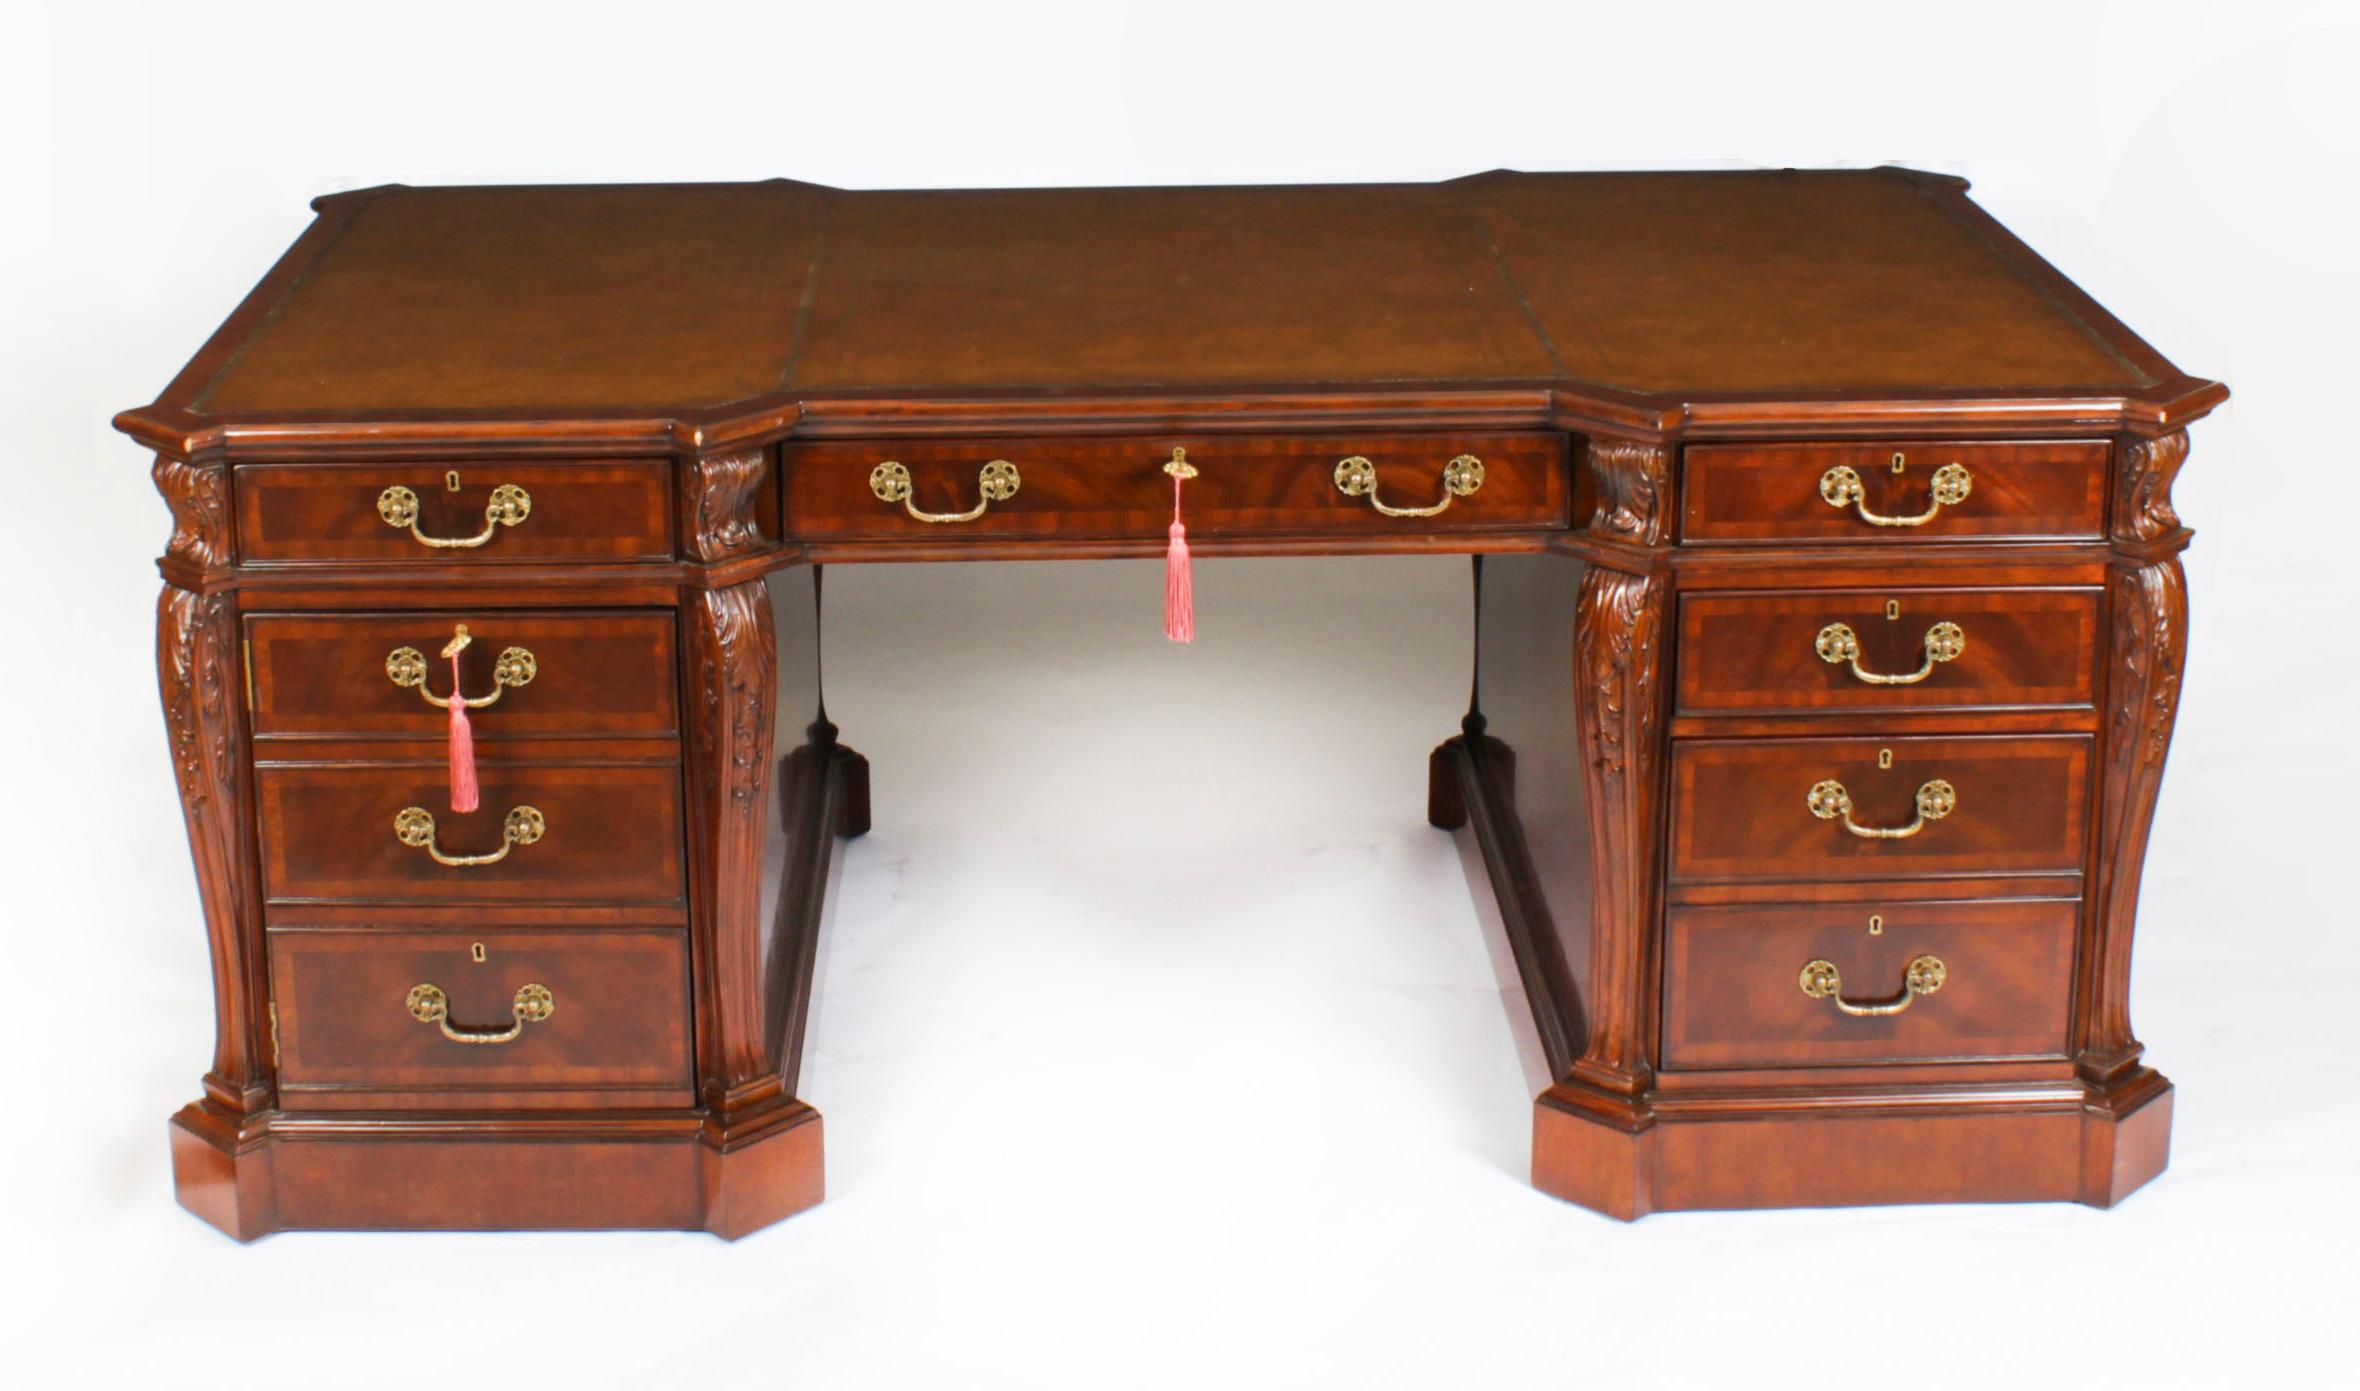 An exquisite Vintage  flame mahogany partners pedestal desk that dates from the late 20th Century.

This desk has been accomplished in the Georgian manner and is beautifully crafted from flame mahogany with satinwood crossbanded decoration.

The